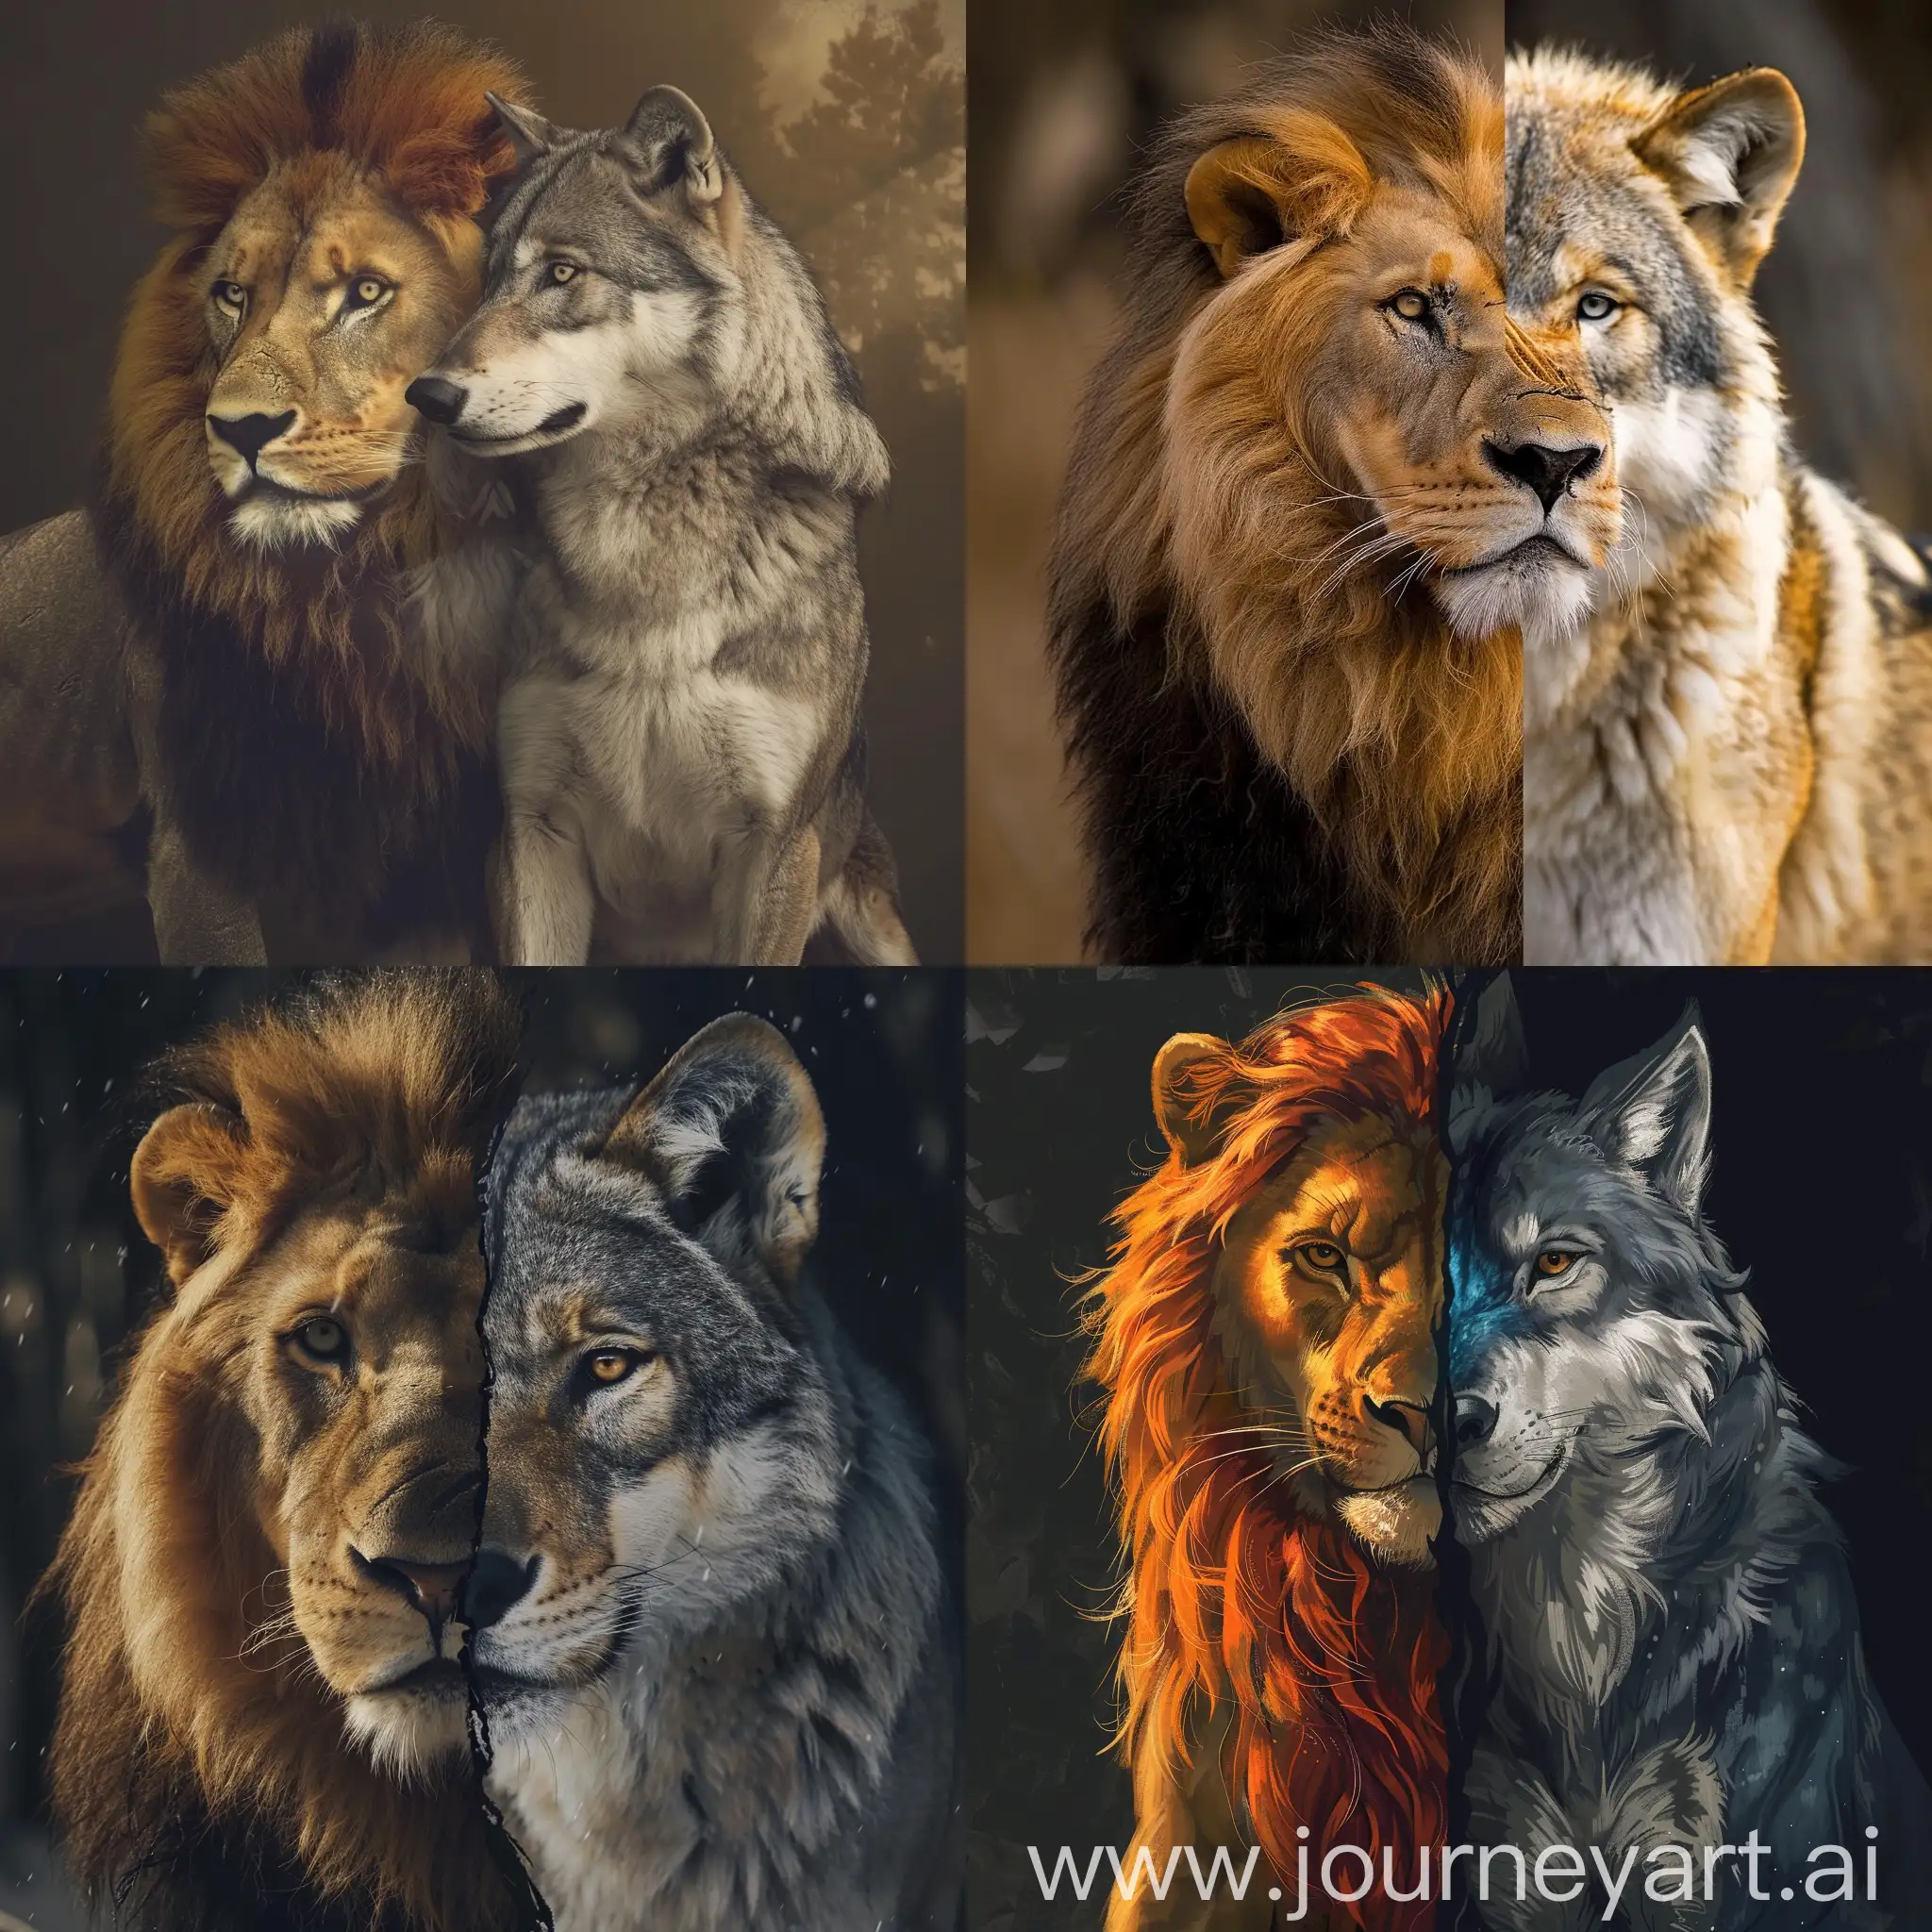 LionWolf-Hybrid-Majestic-Creature-with-a-Unique-Blend-of-Feline-and-Canine-Features